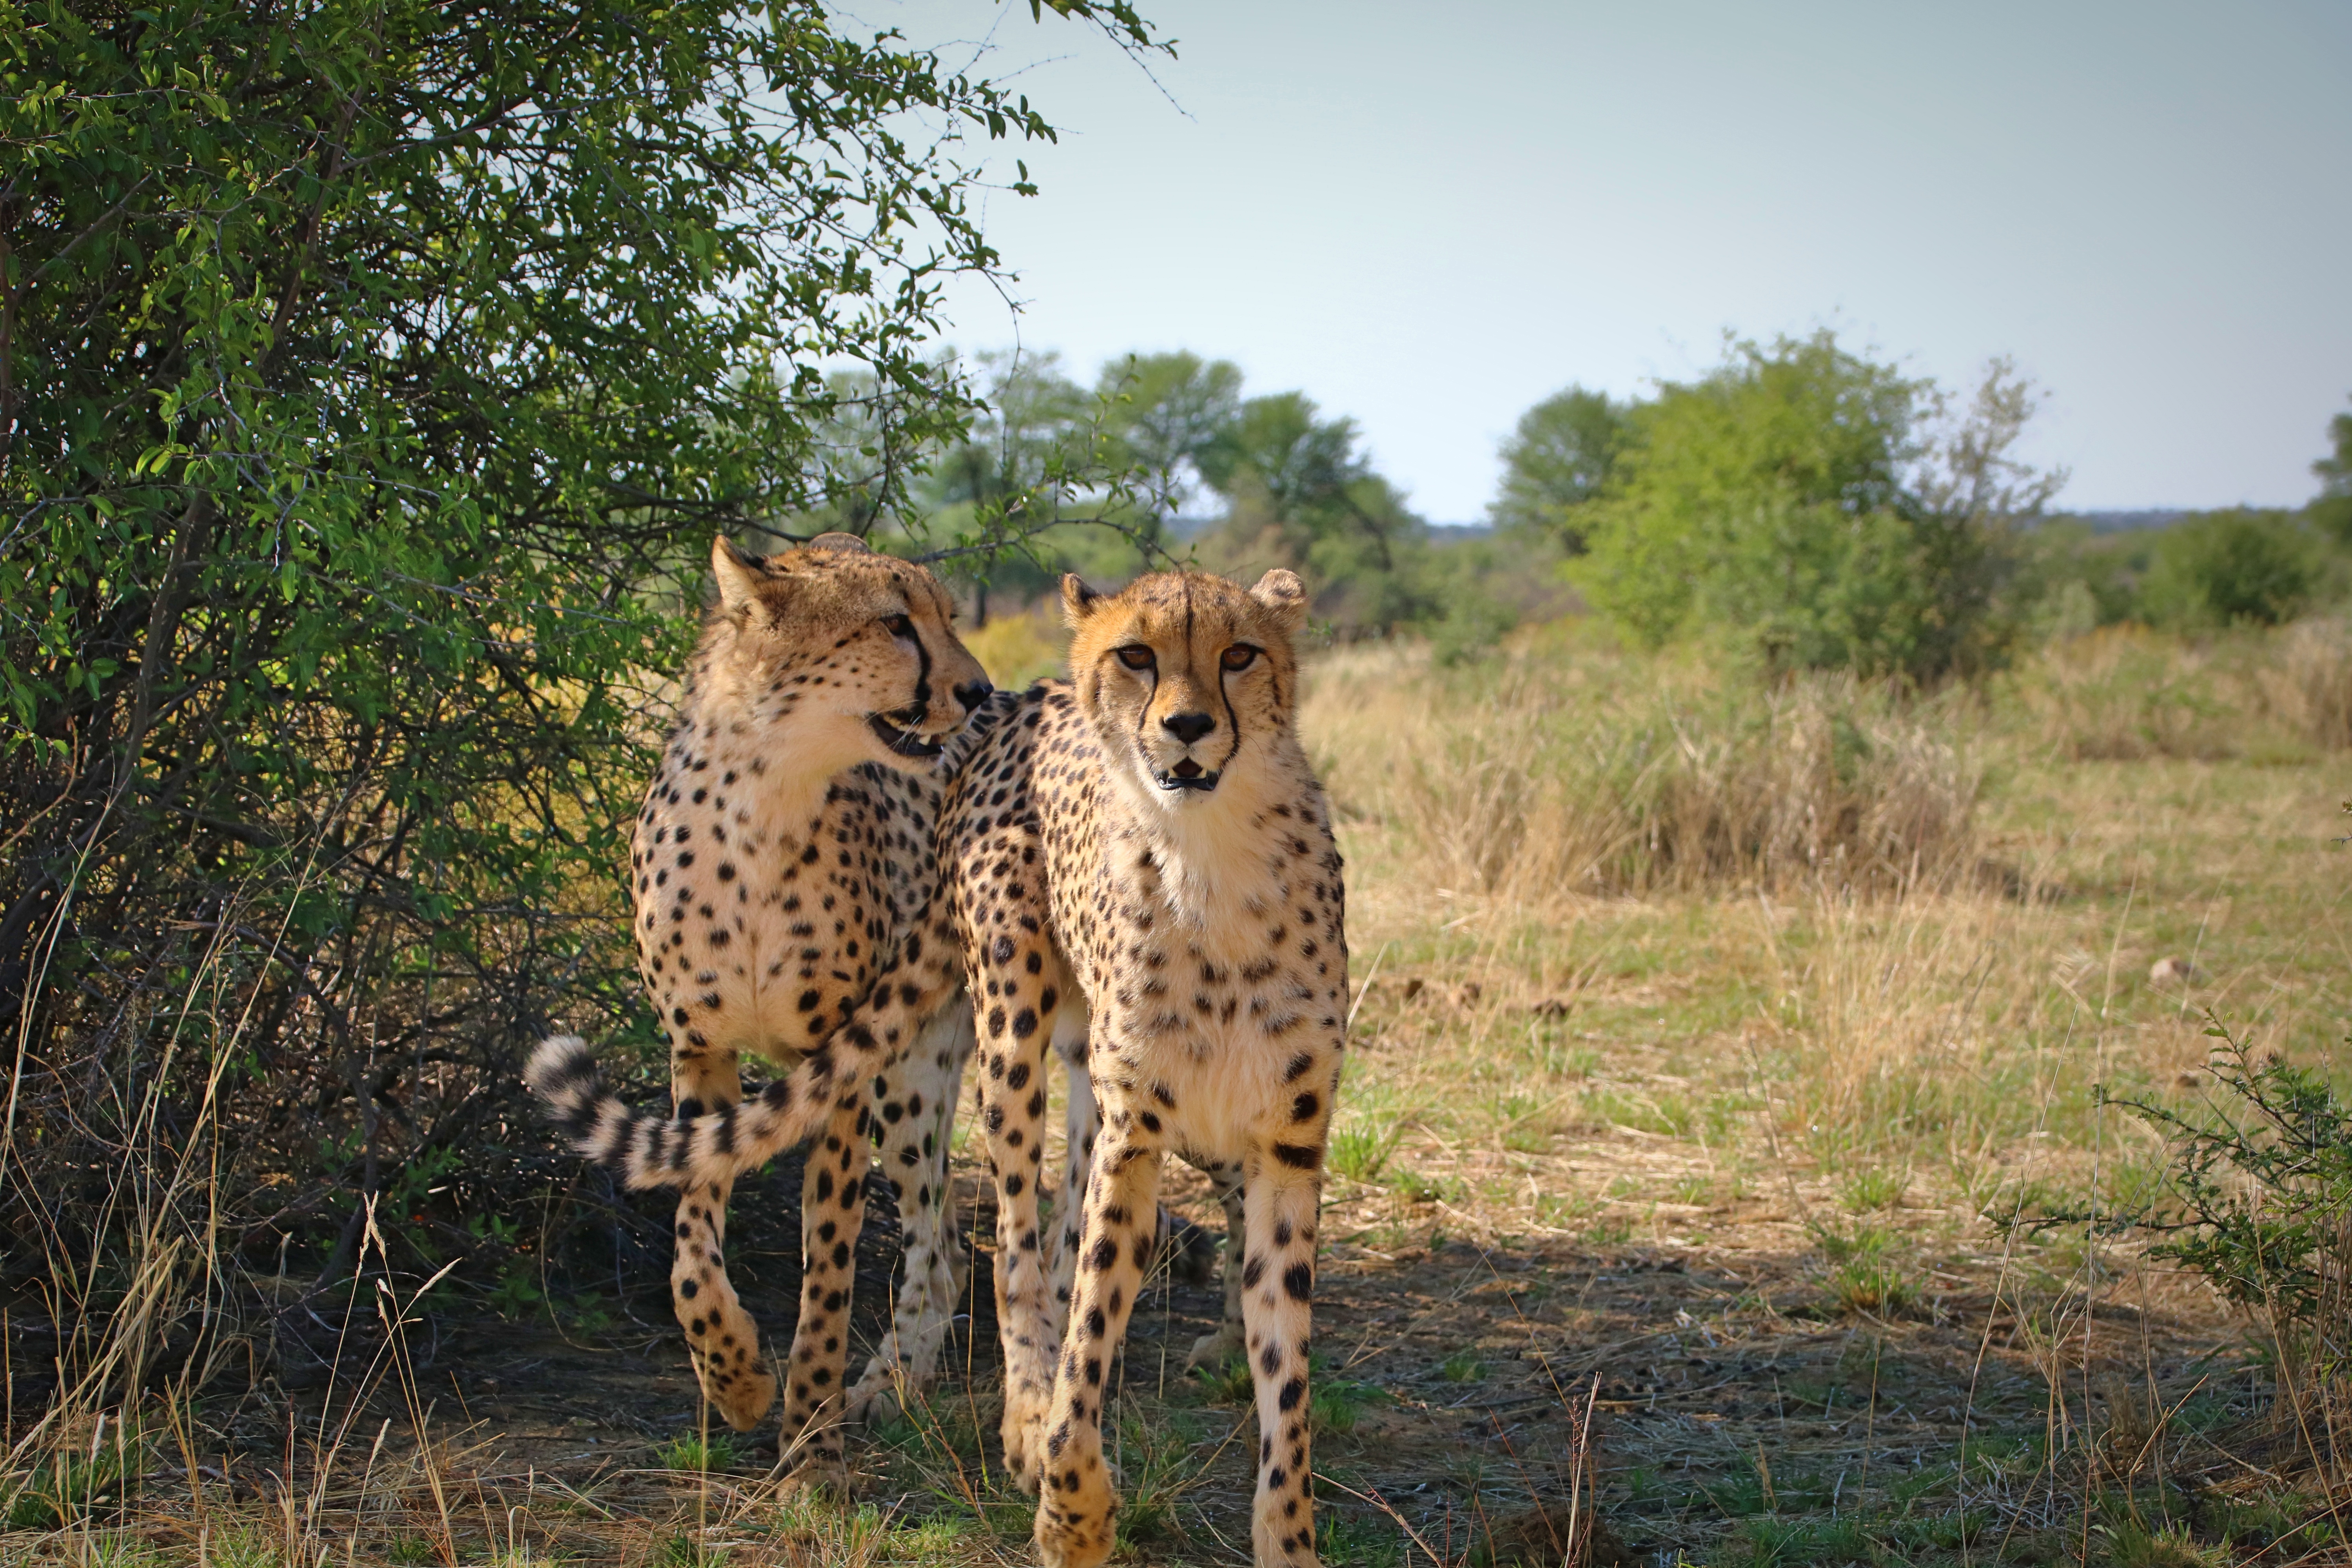 Brother and Sister cheetah look in the camera at the n/a'an ku se sanctuary in Namibia. CC: Jasmine Nears-Biesinger This work by Jasmine Nears is licensed under a Creative Commons Attribution-ShareAlike 4.0 International License